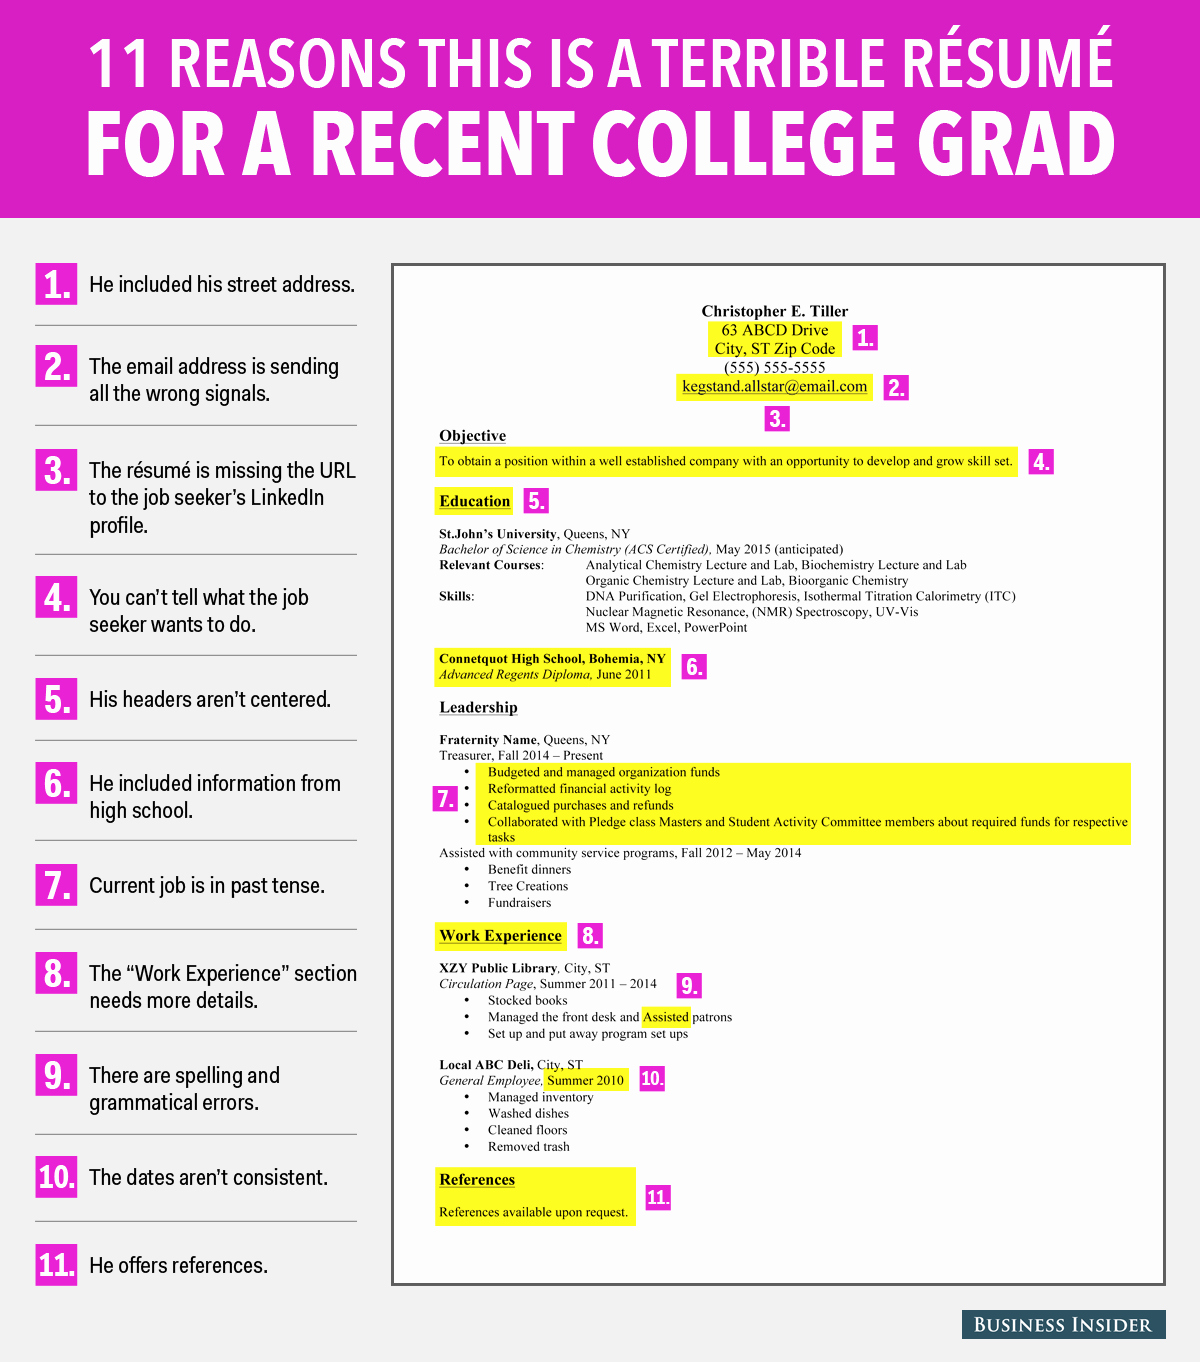 Resumes for Recent College Grads Awesome Terrible Resume for A Recent College Grad Business Insider